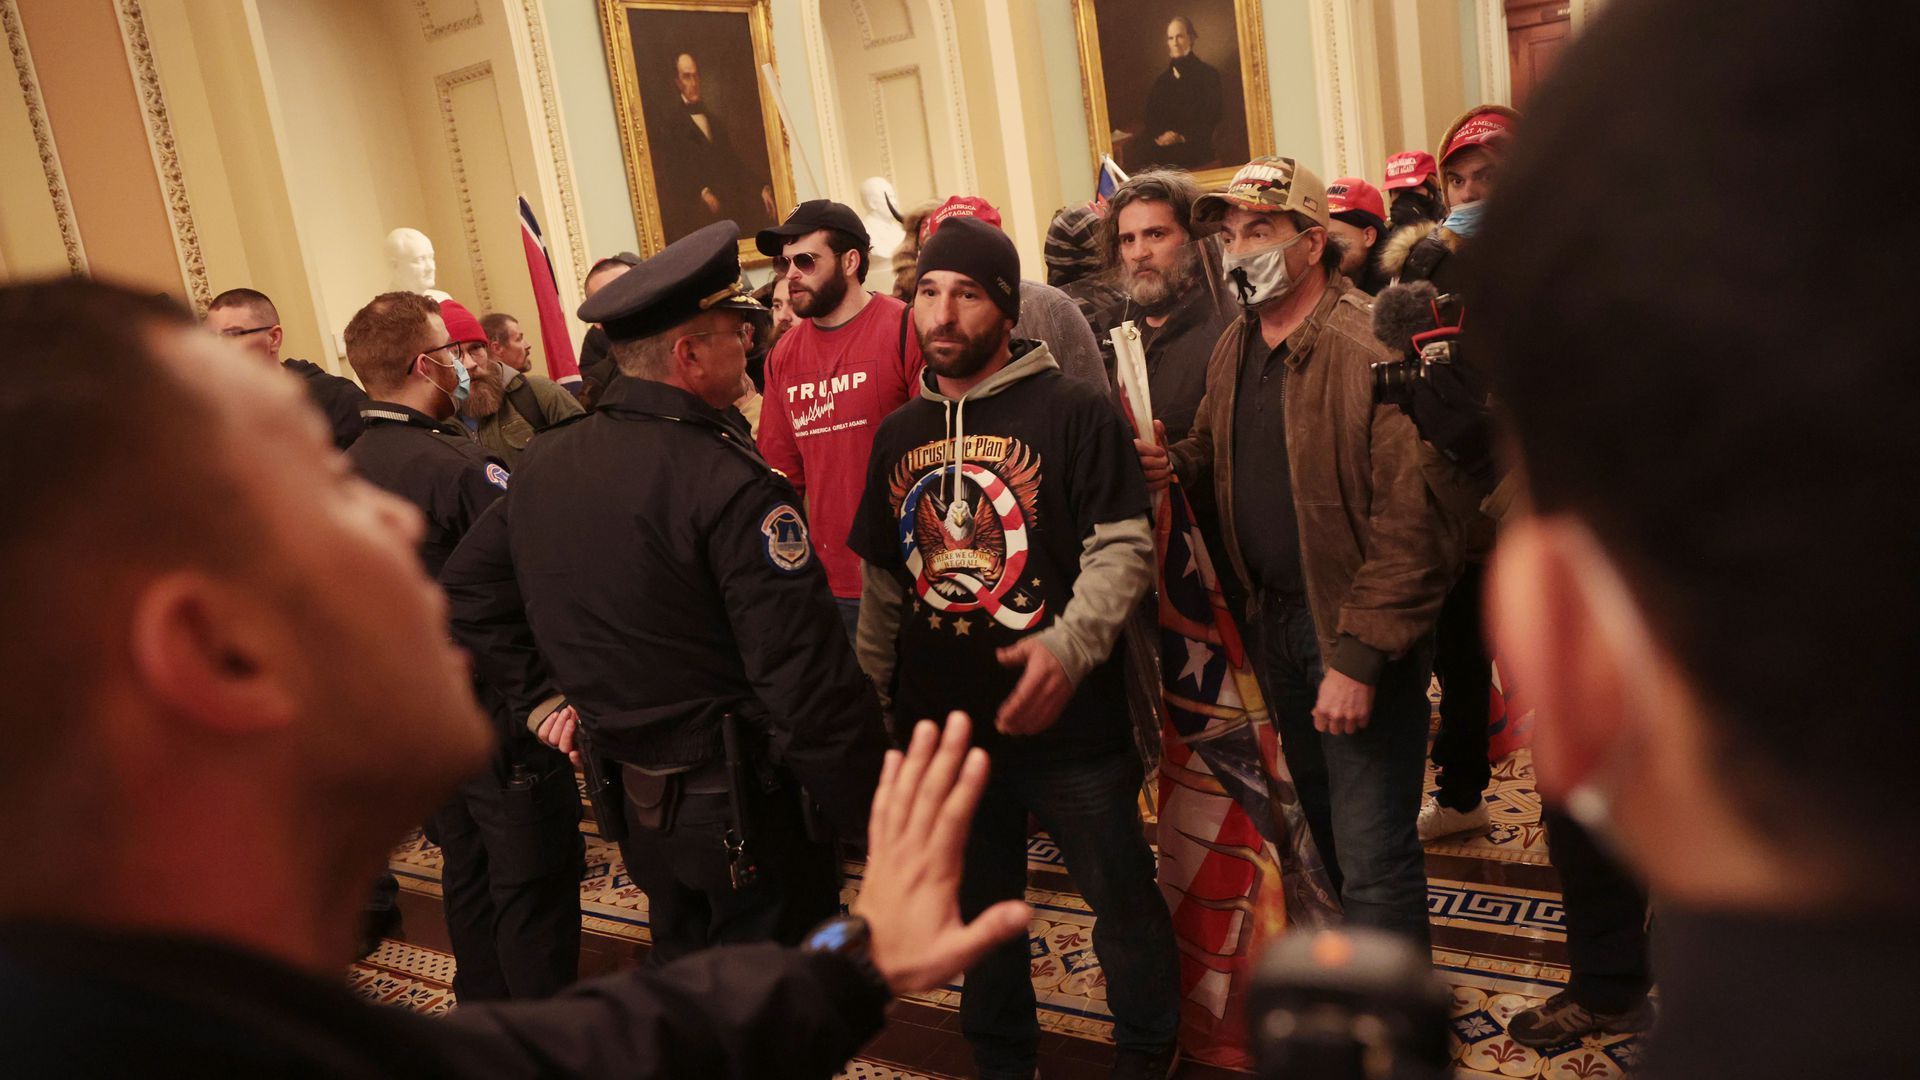 Doug Jensen (center) is shown with a group of rioters inside the Capitol on Jan. 6, 2021. Photo: Win McNamee/Getty Images